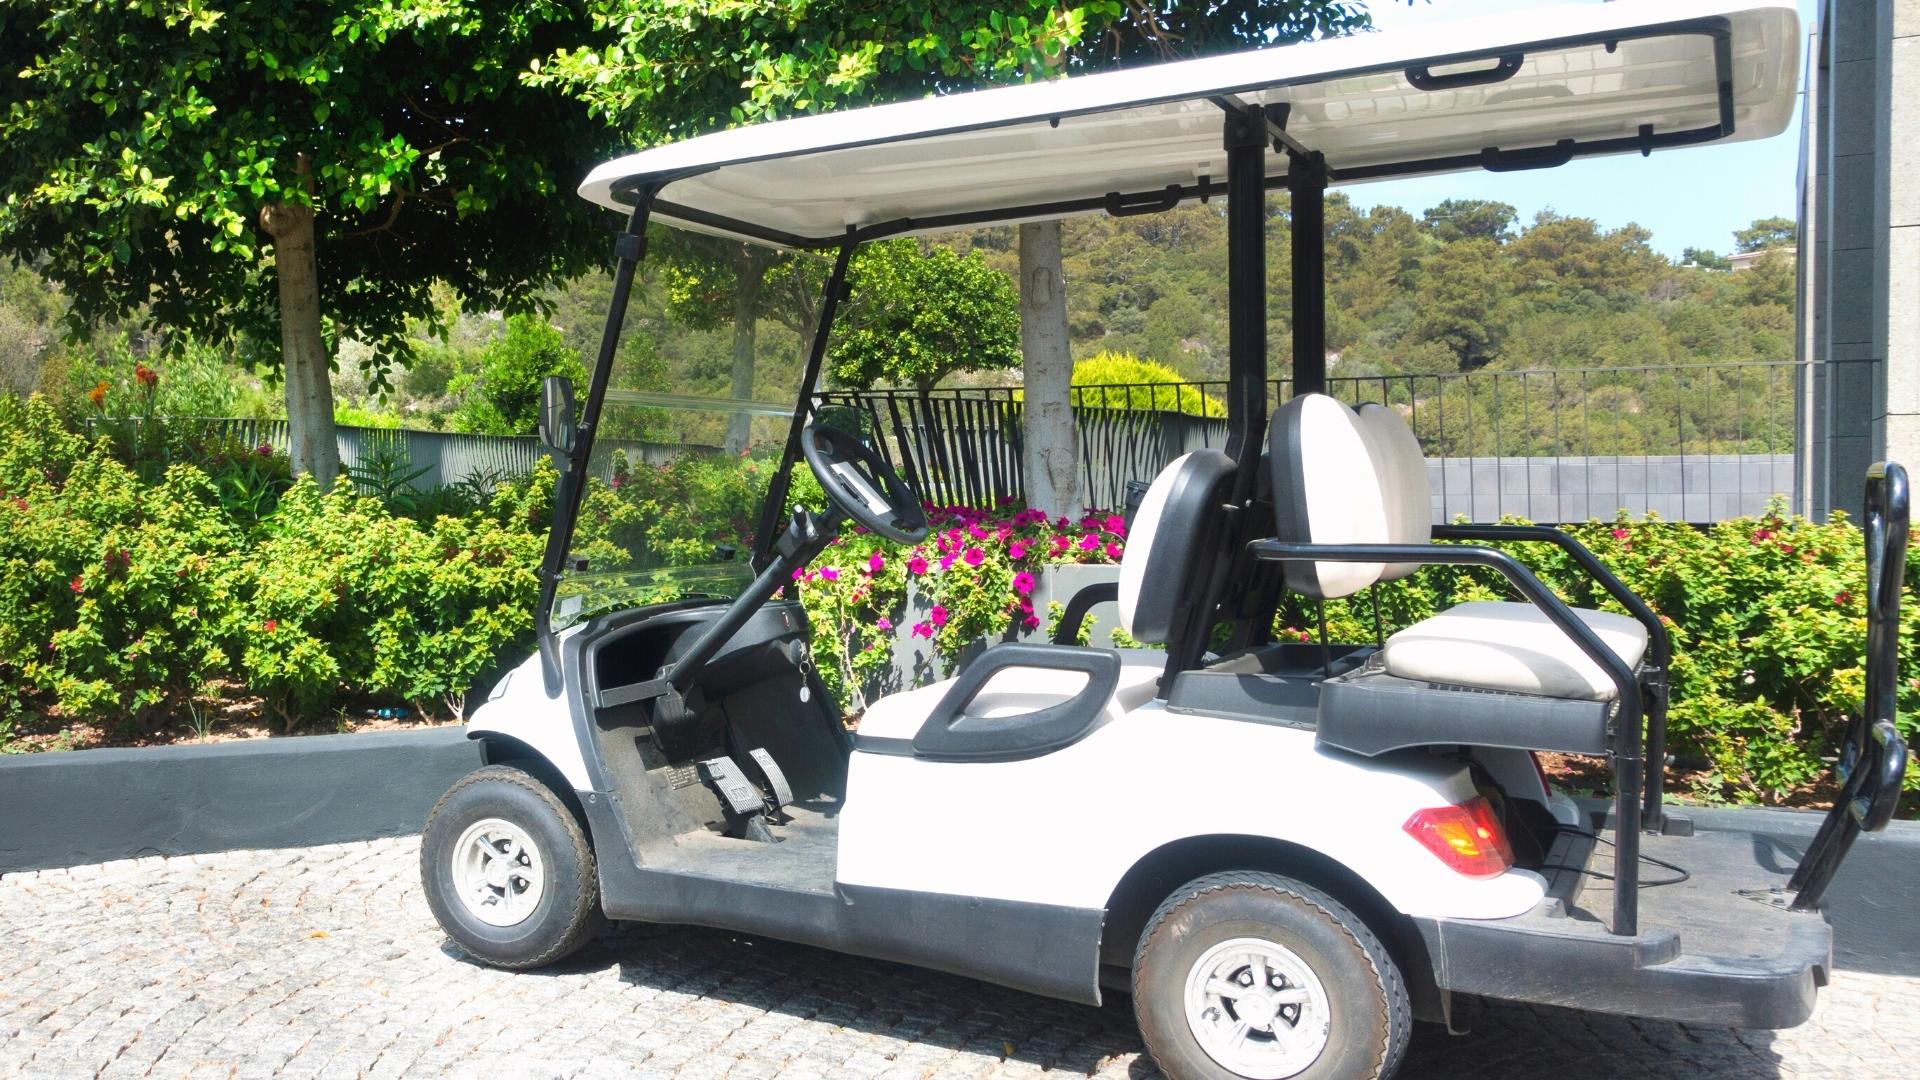 Large Golf Carts for Rent on OKI